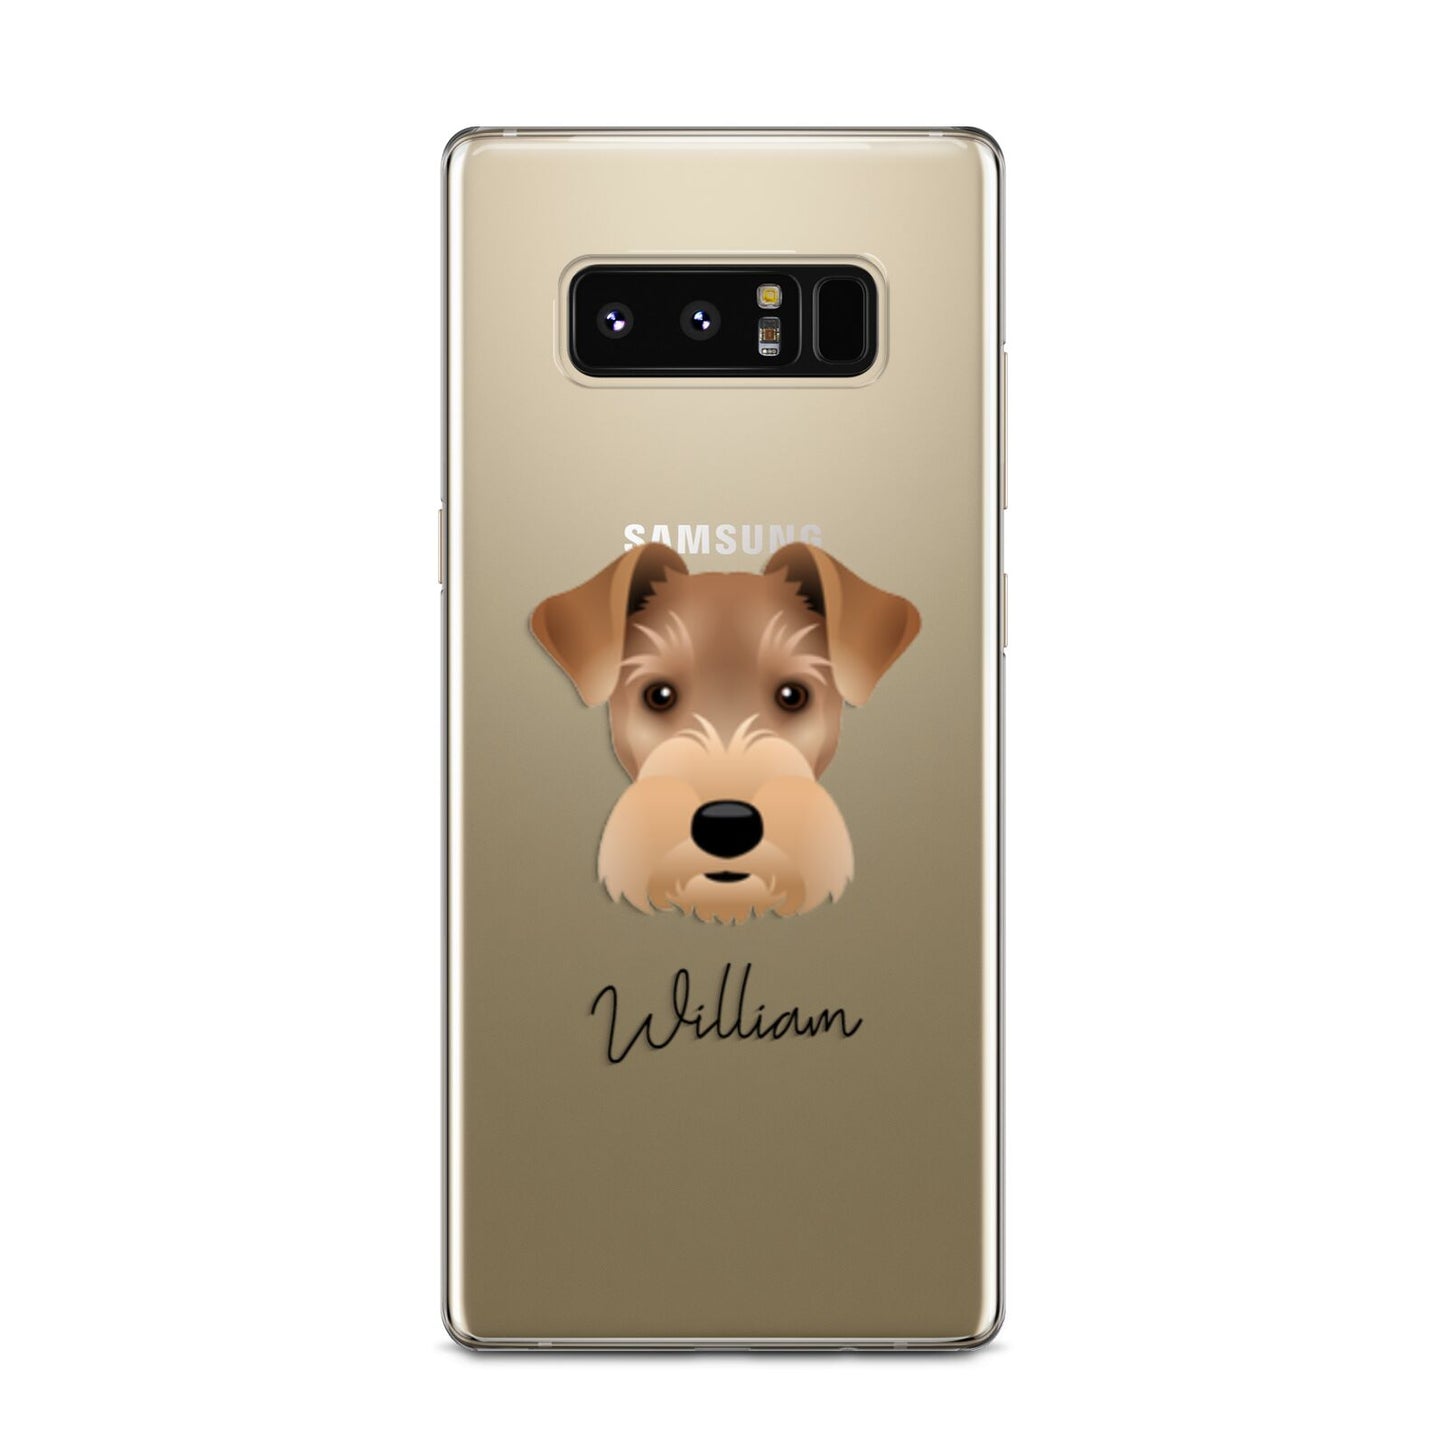 Welsh Terrier Personalised Samsung Galaxy Note 8 Case